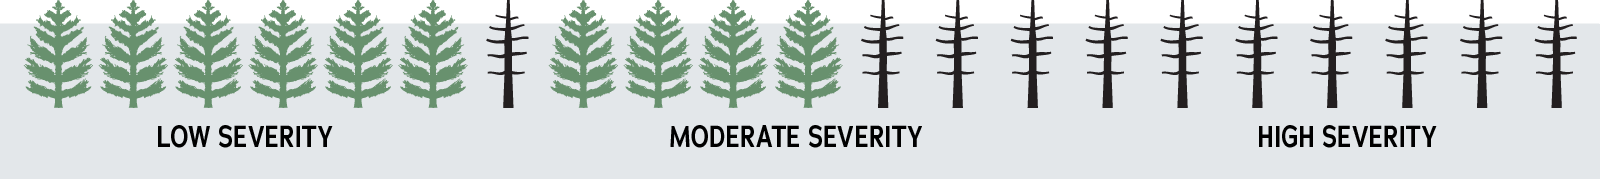 low severity: 6 out of 7 trees are alive. Moderate severity: 4 out of 7 trees are alive. High severity: all trees are dead.